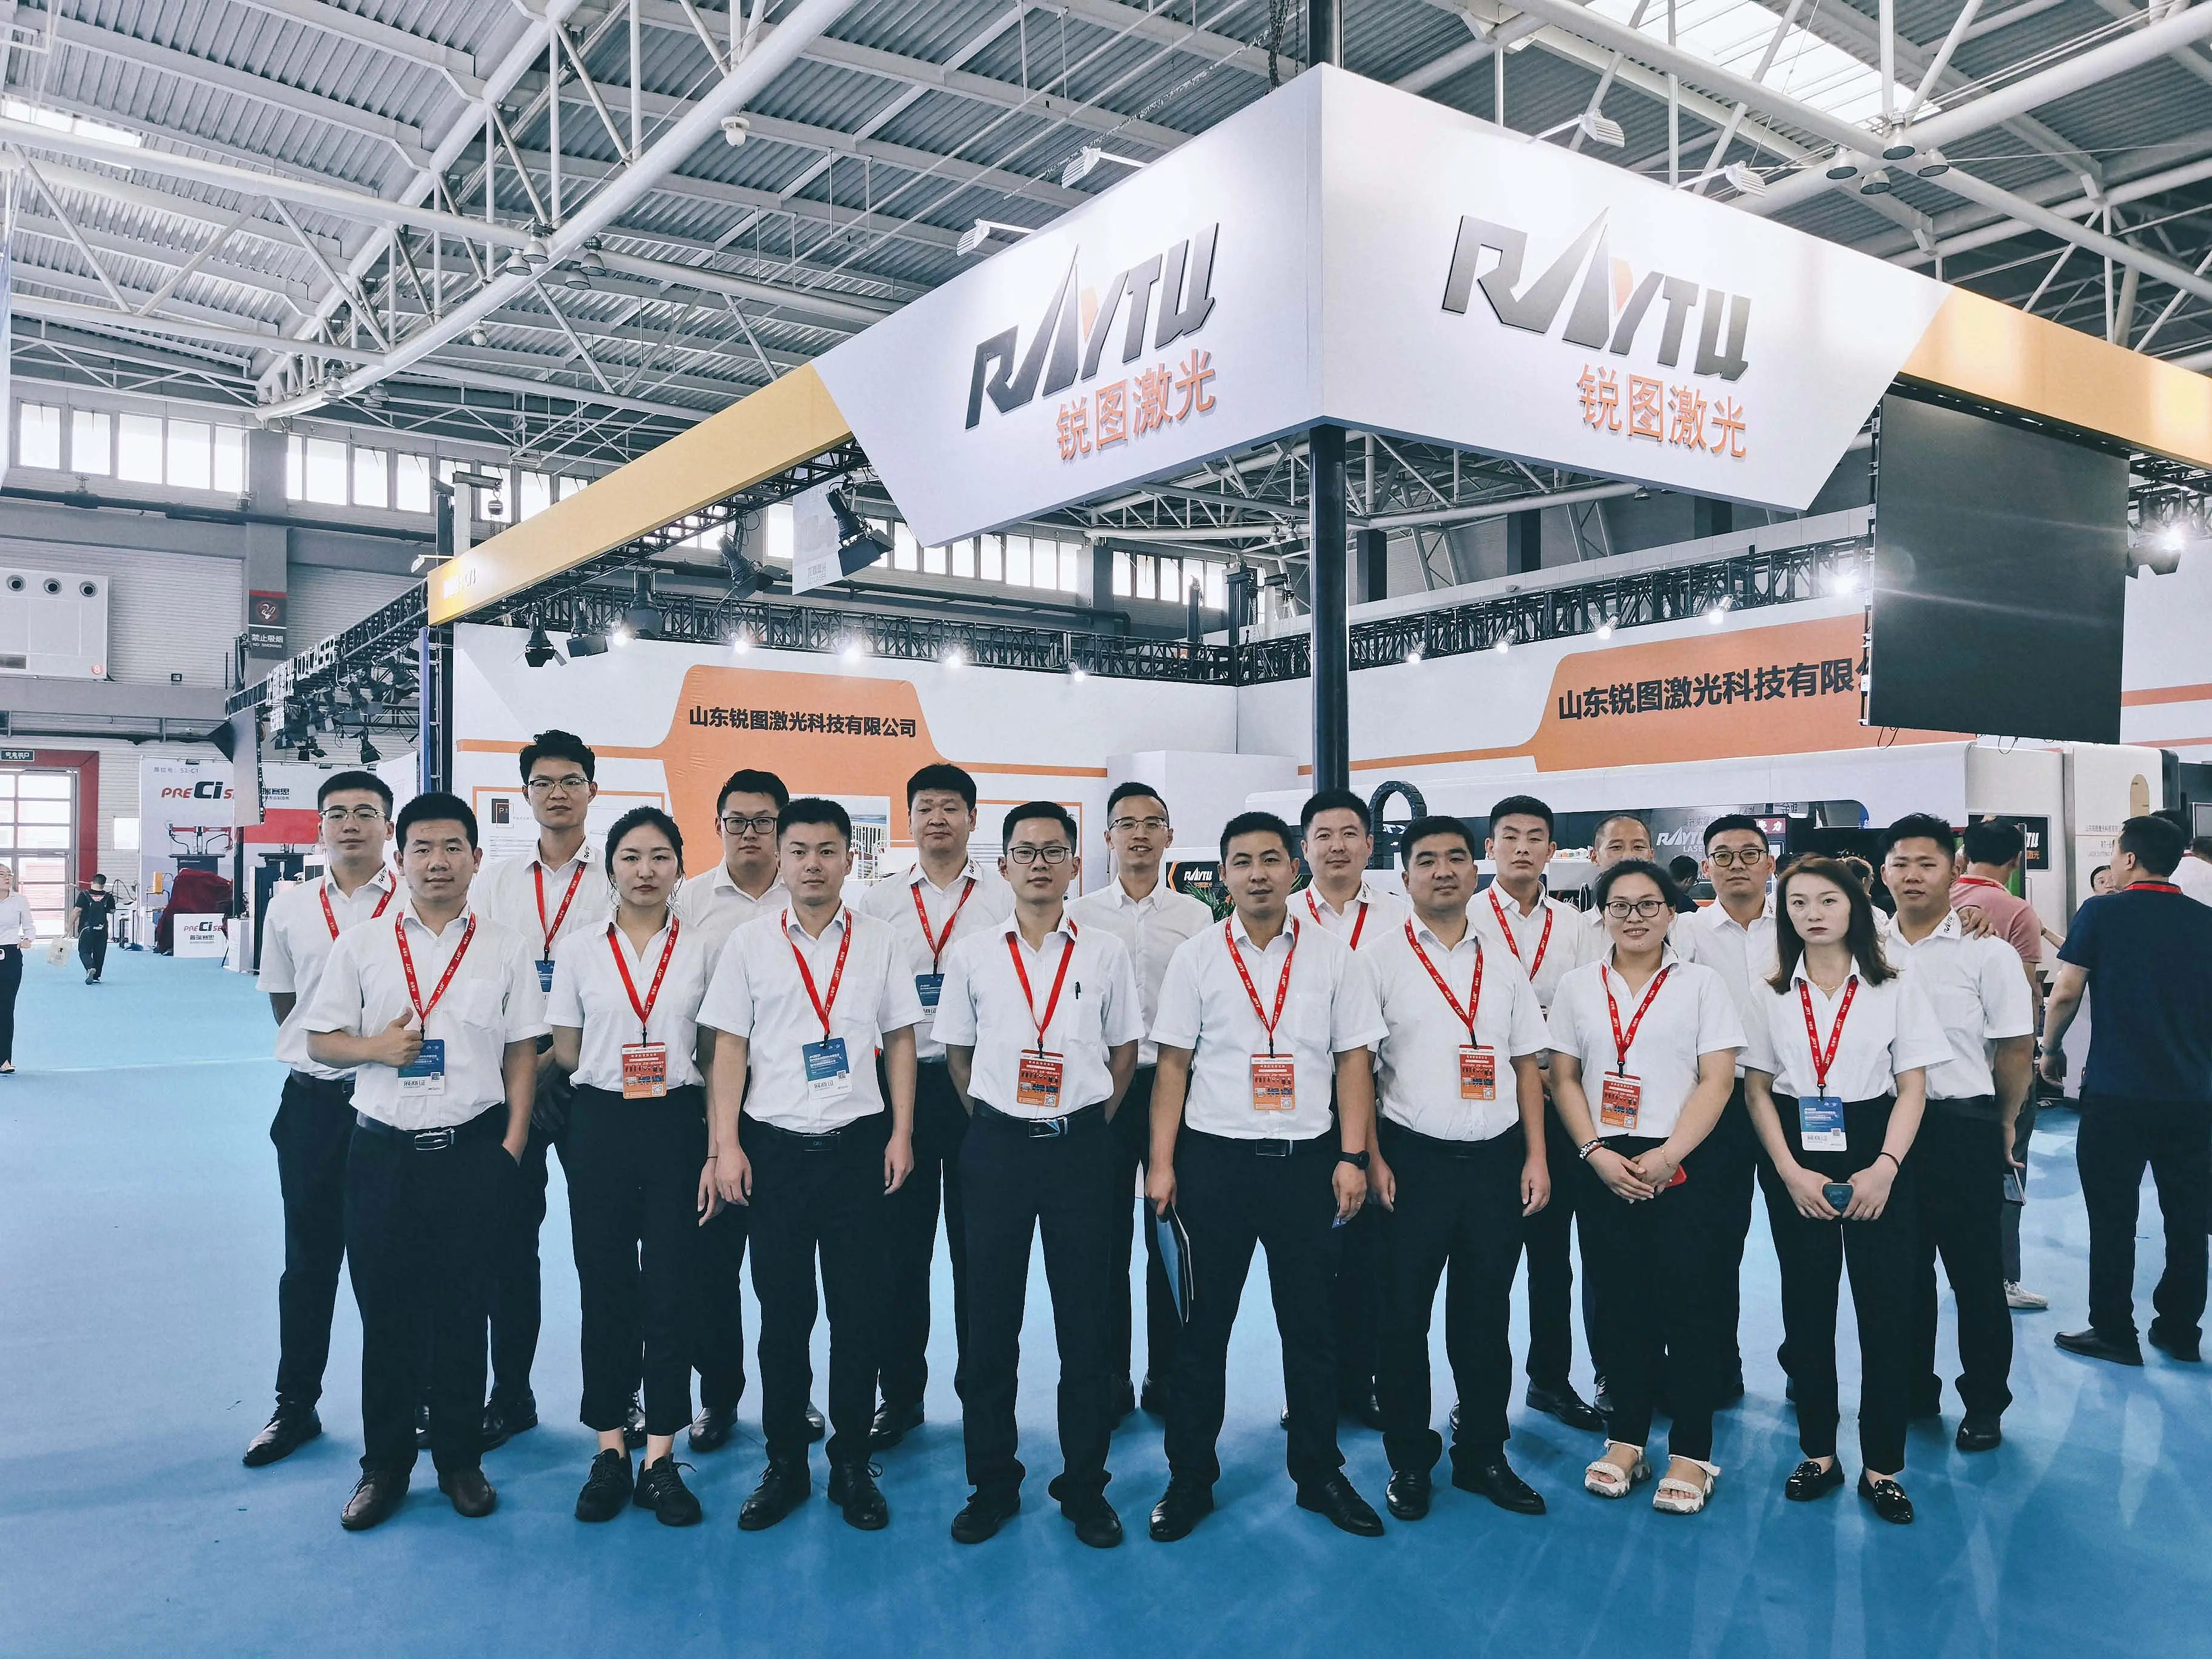 Raytu Laser was invited to participate in the 24th Qingdao International Machine Tool Exhibition (JM2021)